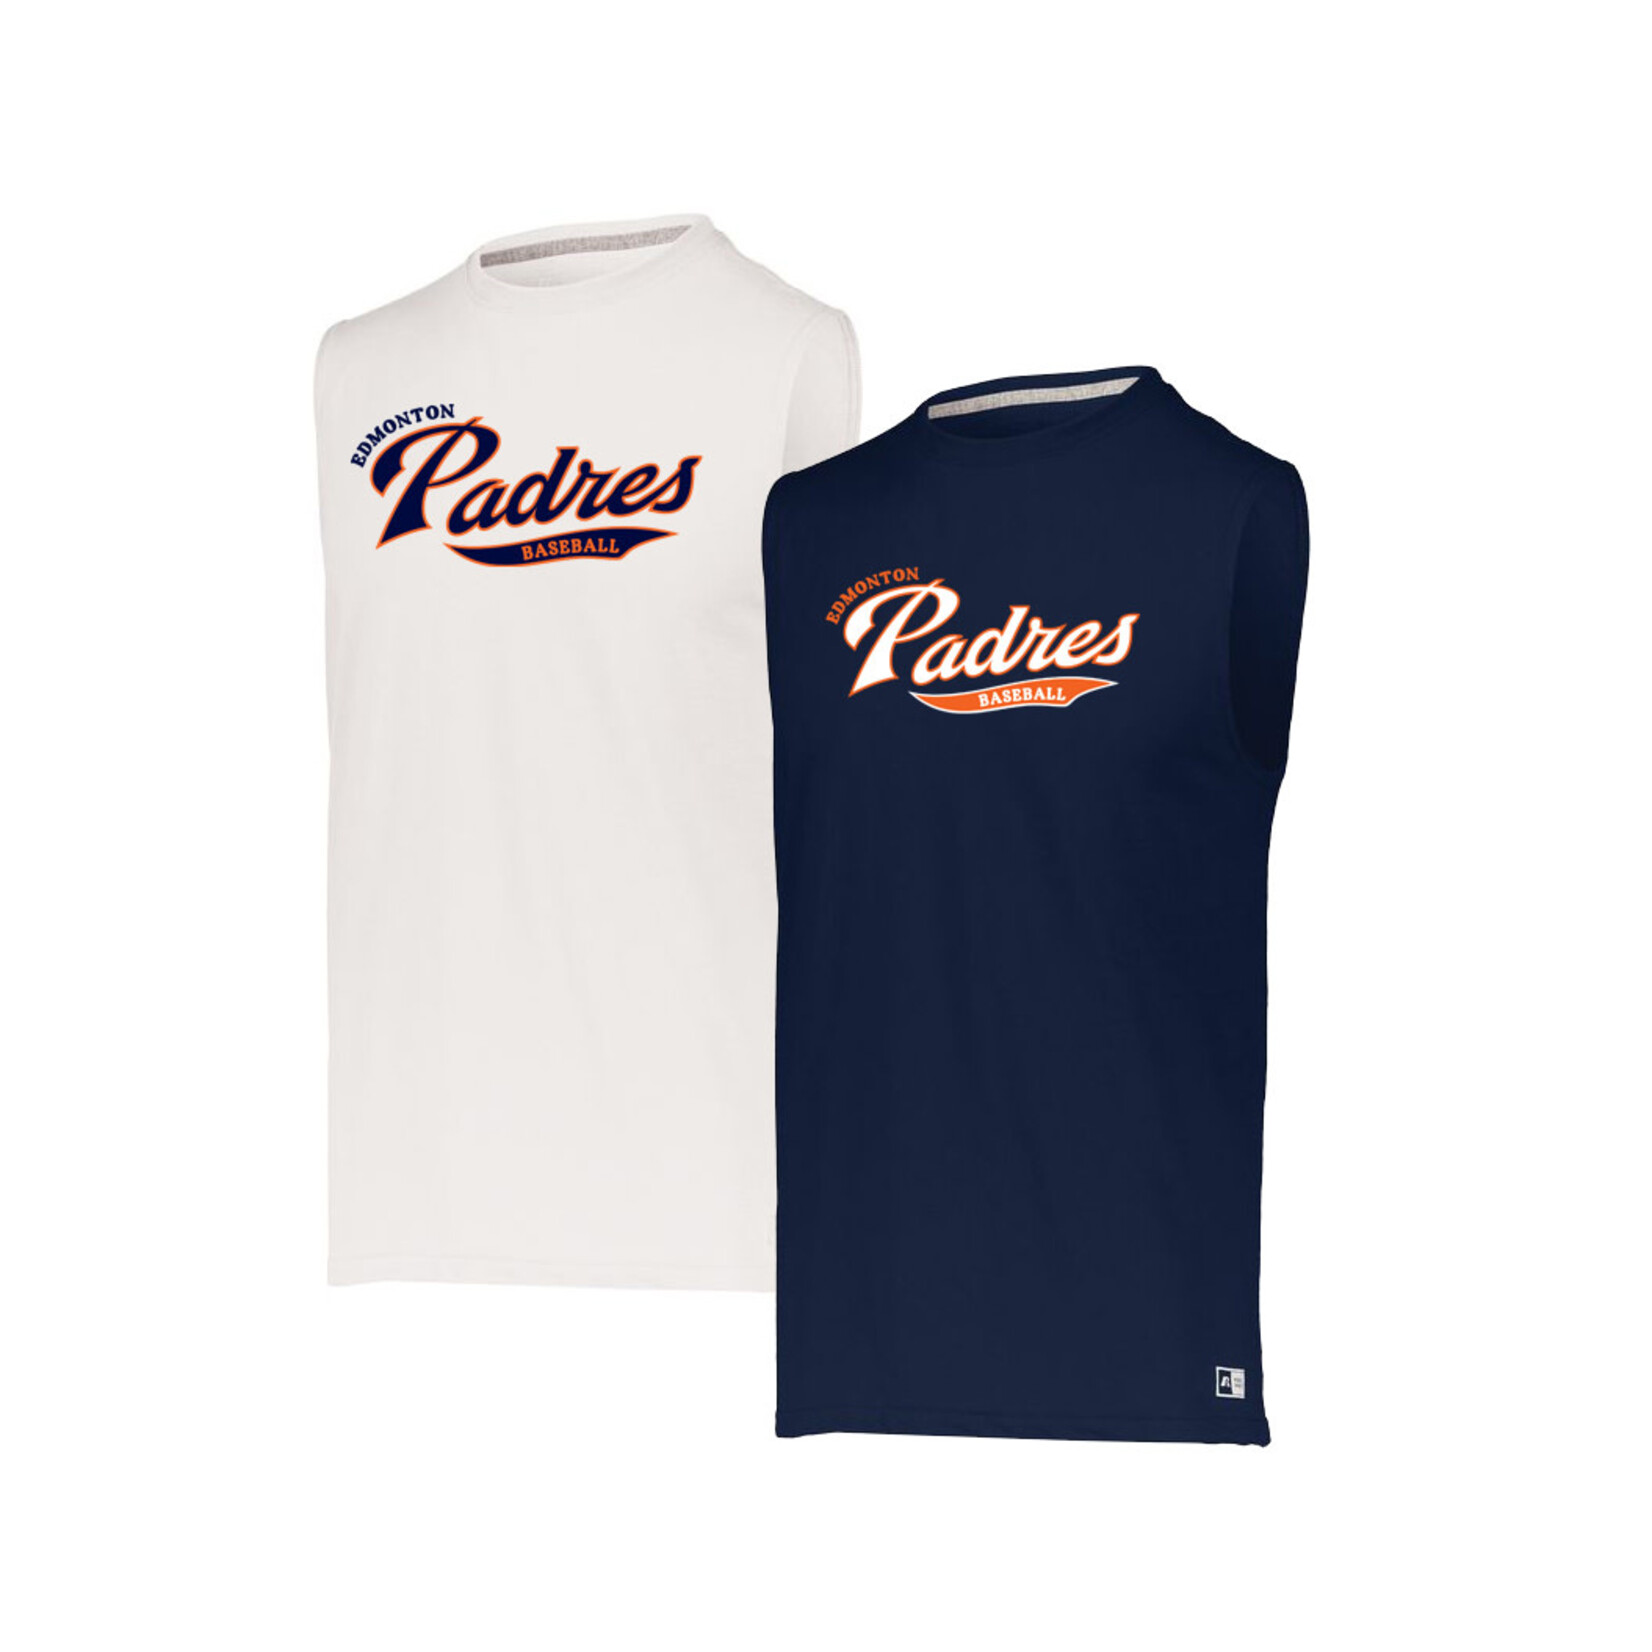 Russell Padres Essential Muscle Tee